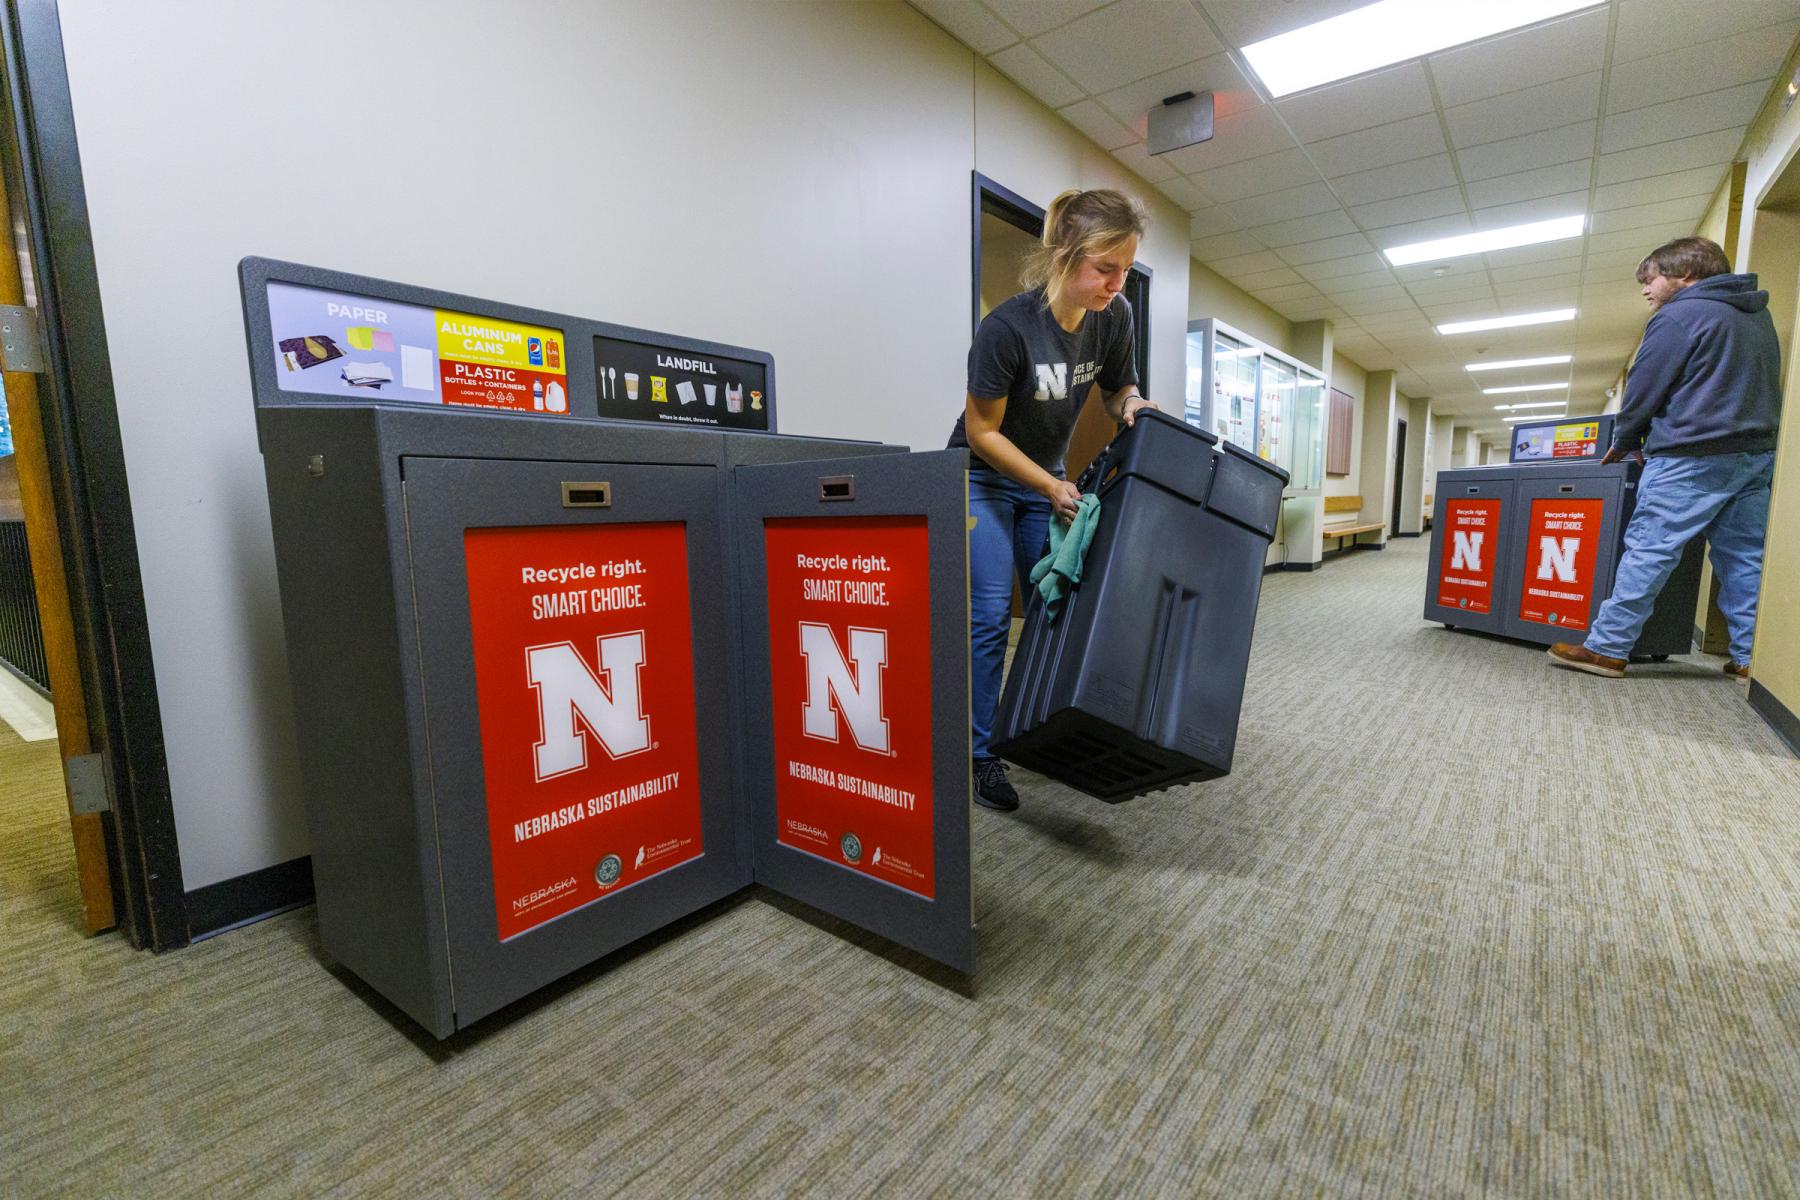 All in the Hall recycling stations are implemented in buildings across campus